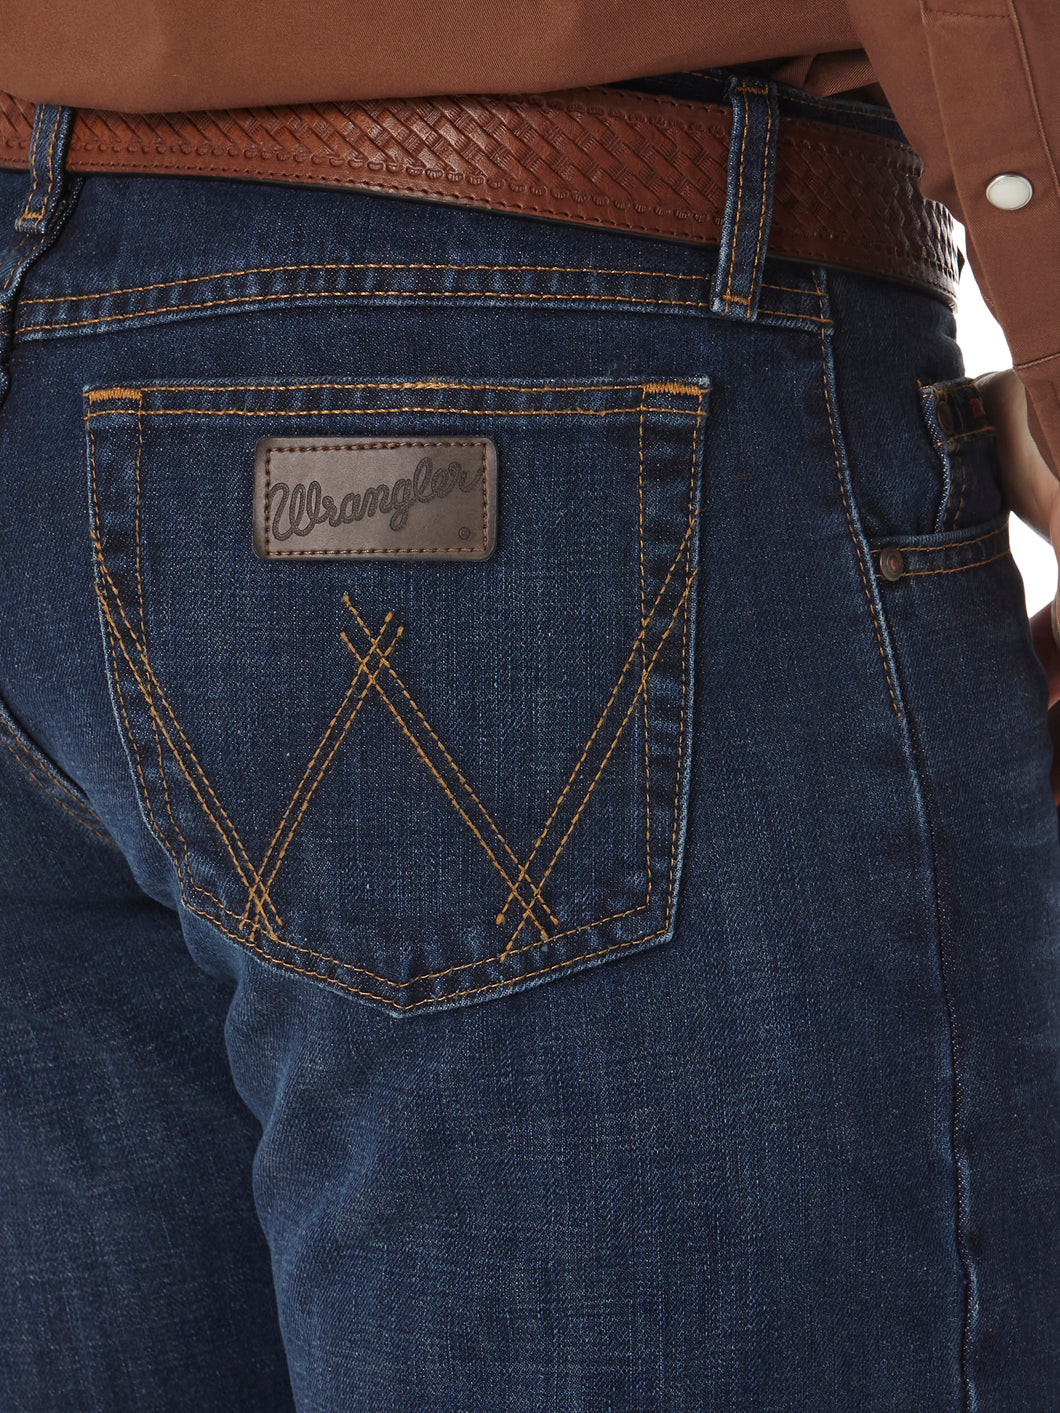 Wrangler 20X Competition Jean - 02MWXDL